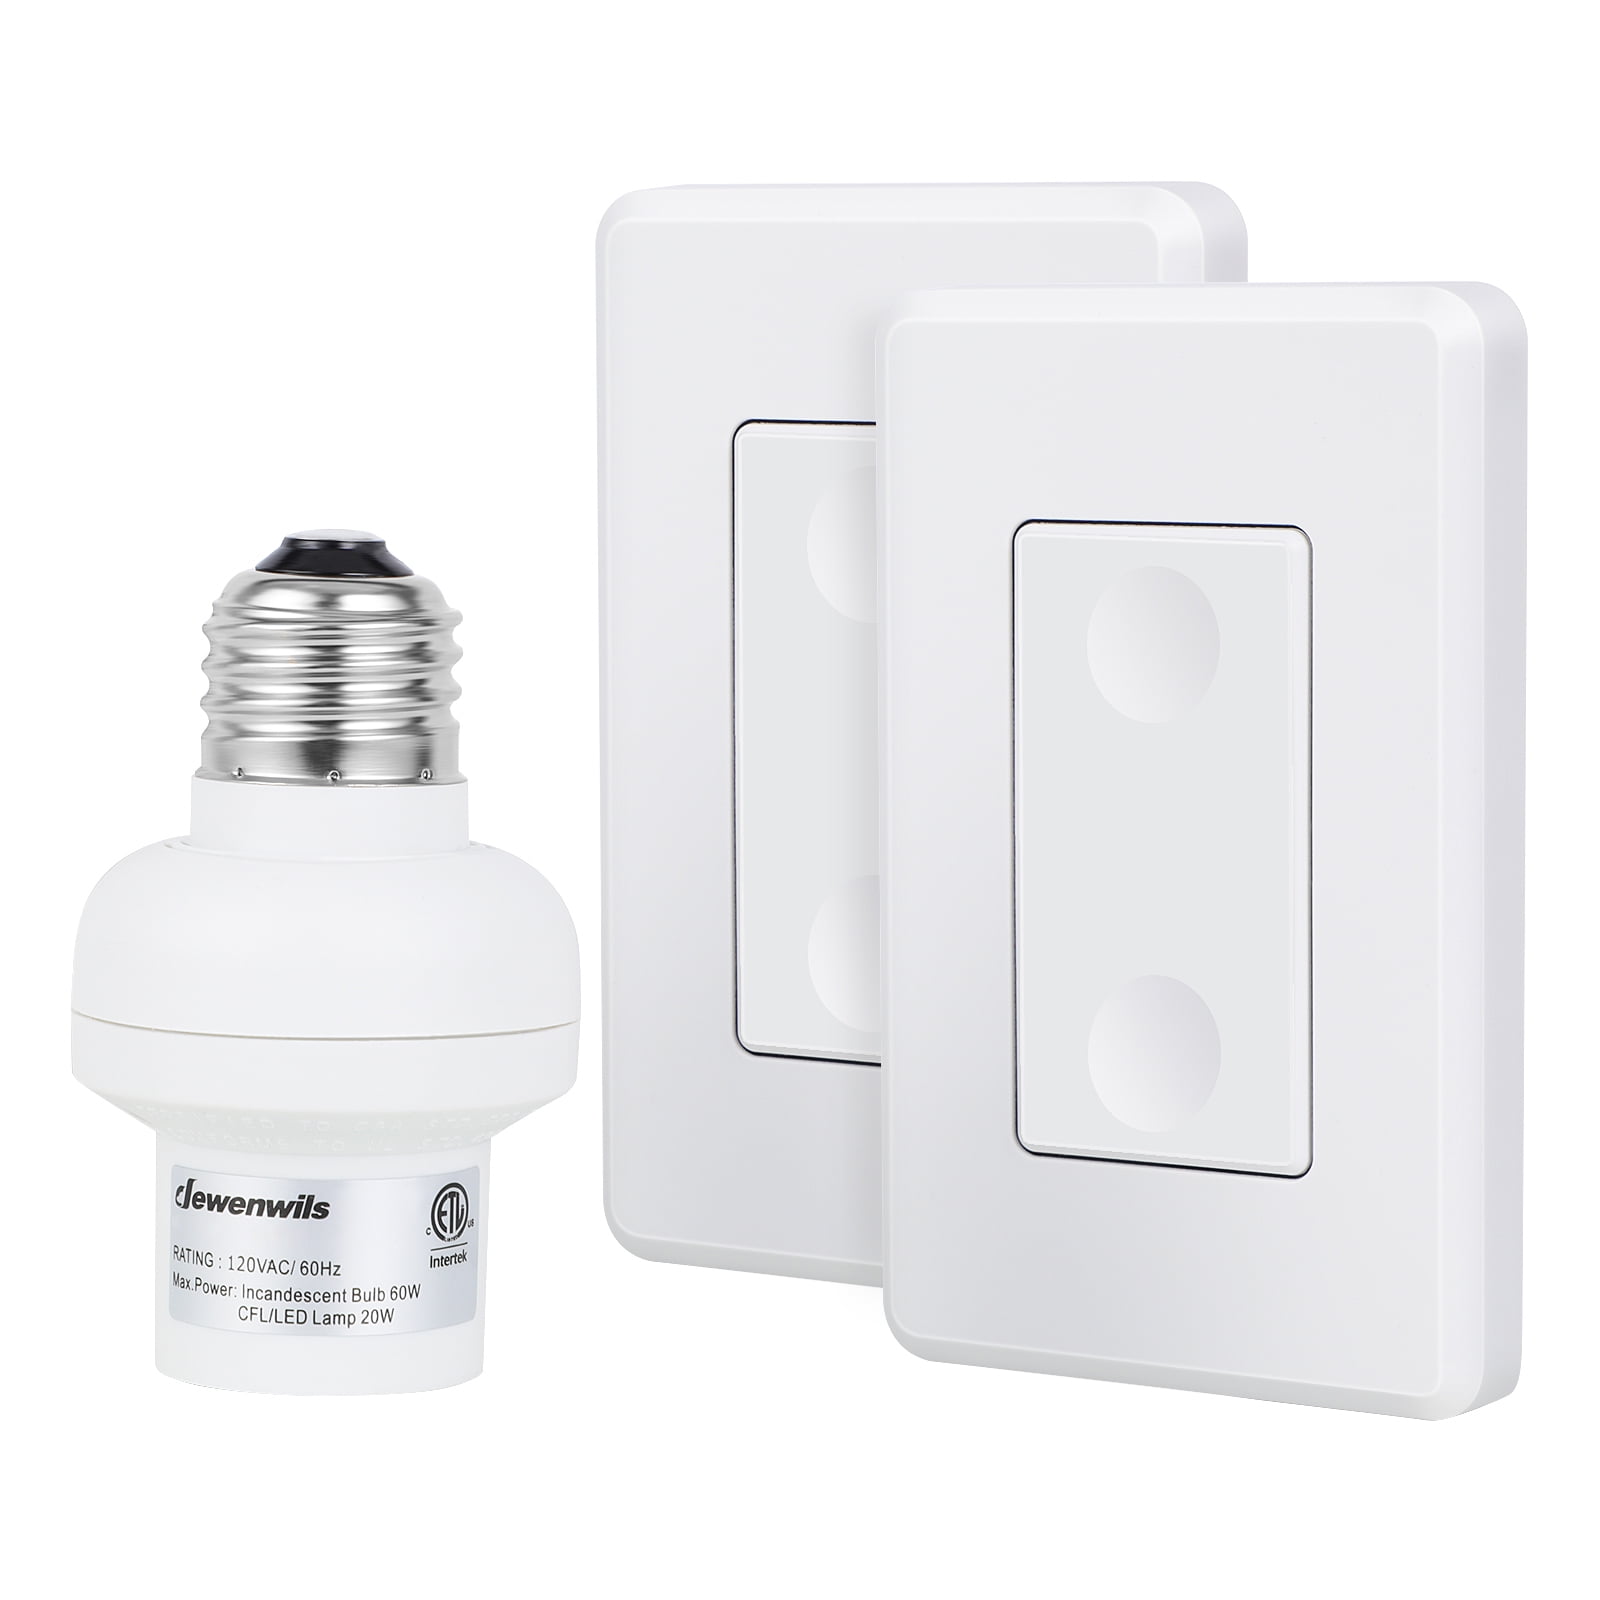 Zoiinet 500W Remote Control Light Bulb Socket, Wireless Light Switch for  Pull Chain Lighting Fixture, E26 E27 Bulbs Base Holder, Programmable, No  Wiring Needed, for Bedroom, Stair, Closet & Garage - Coupon